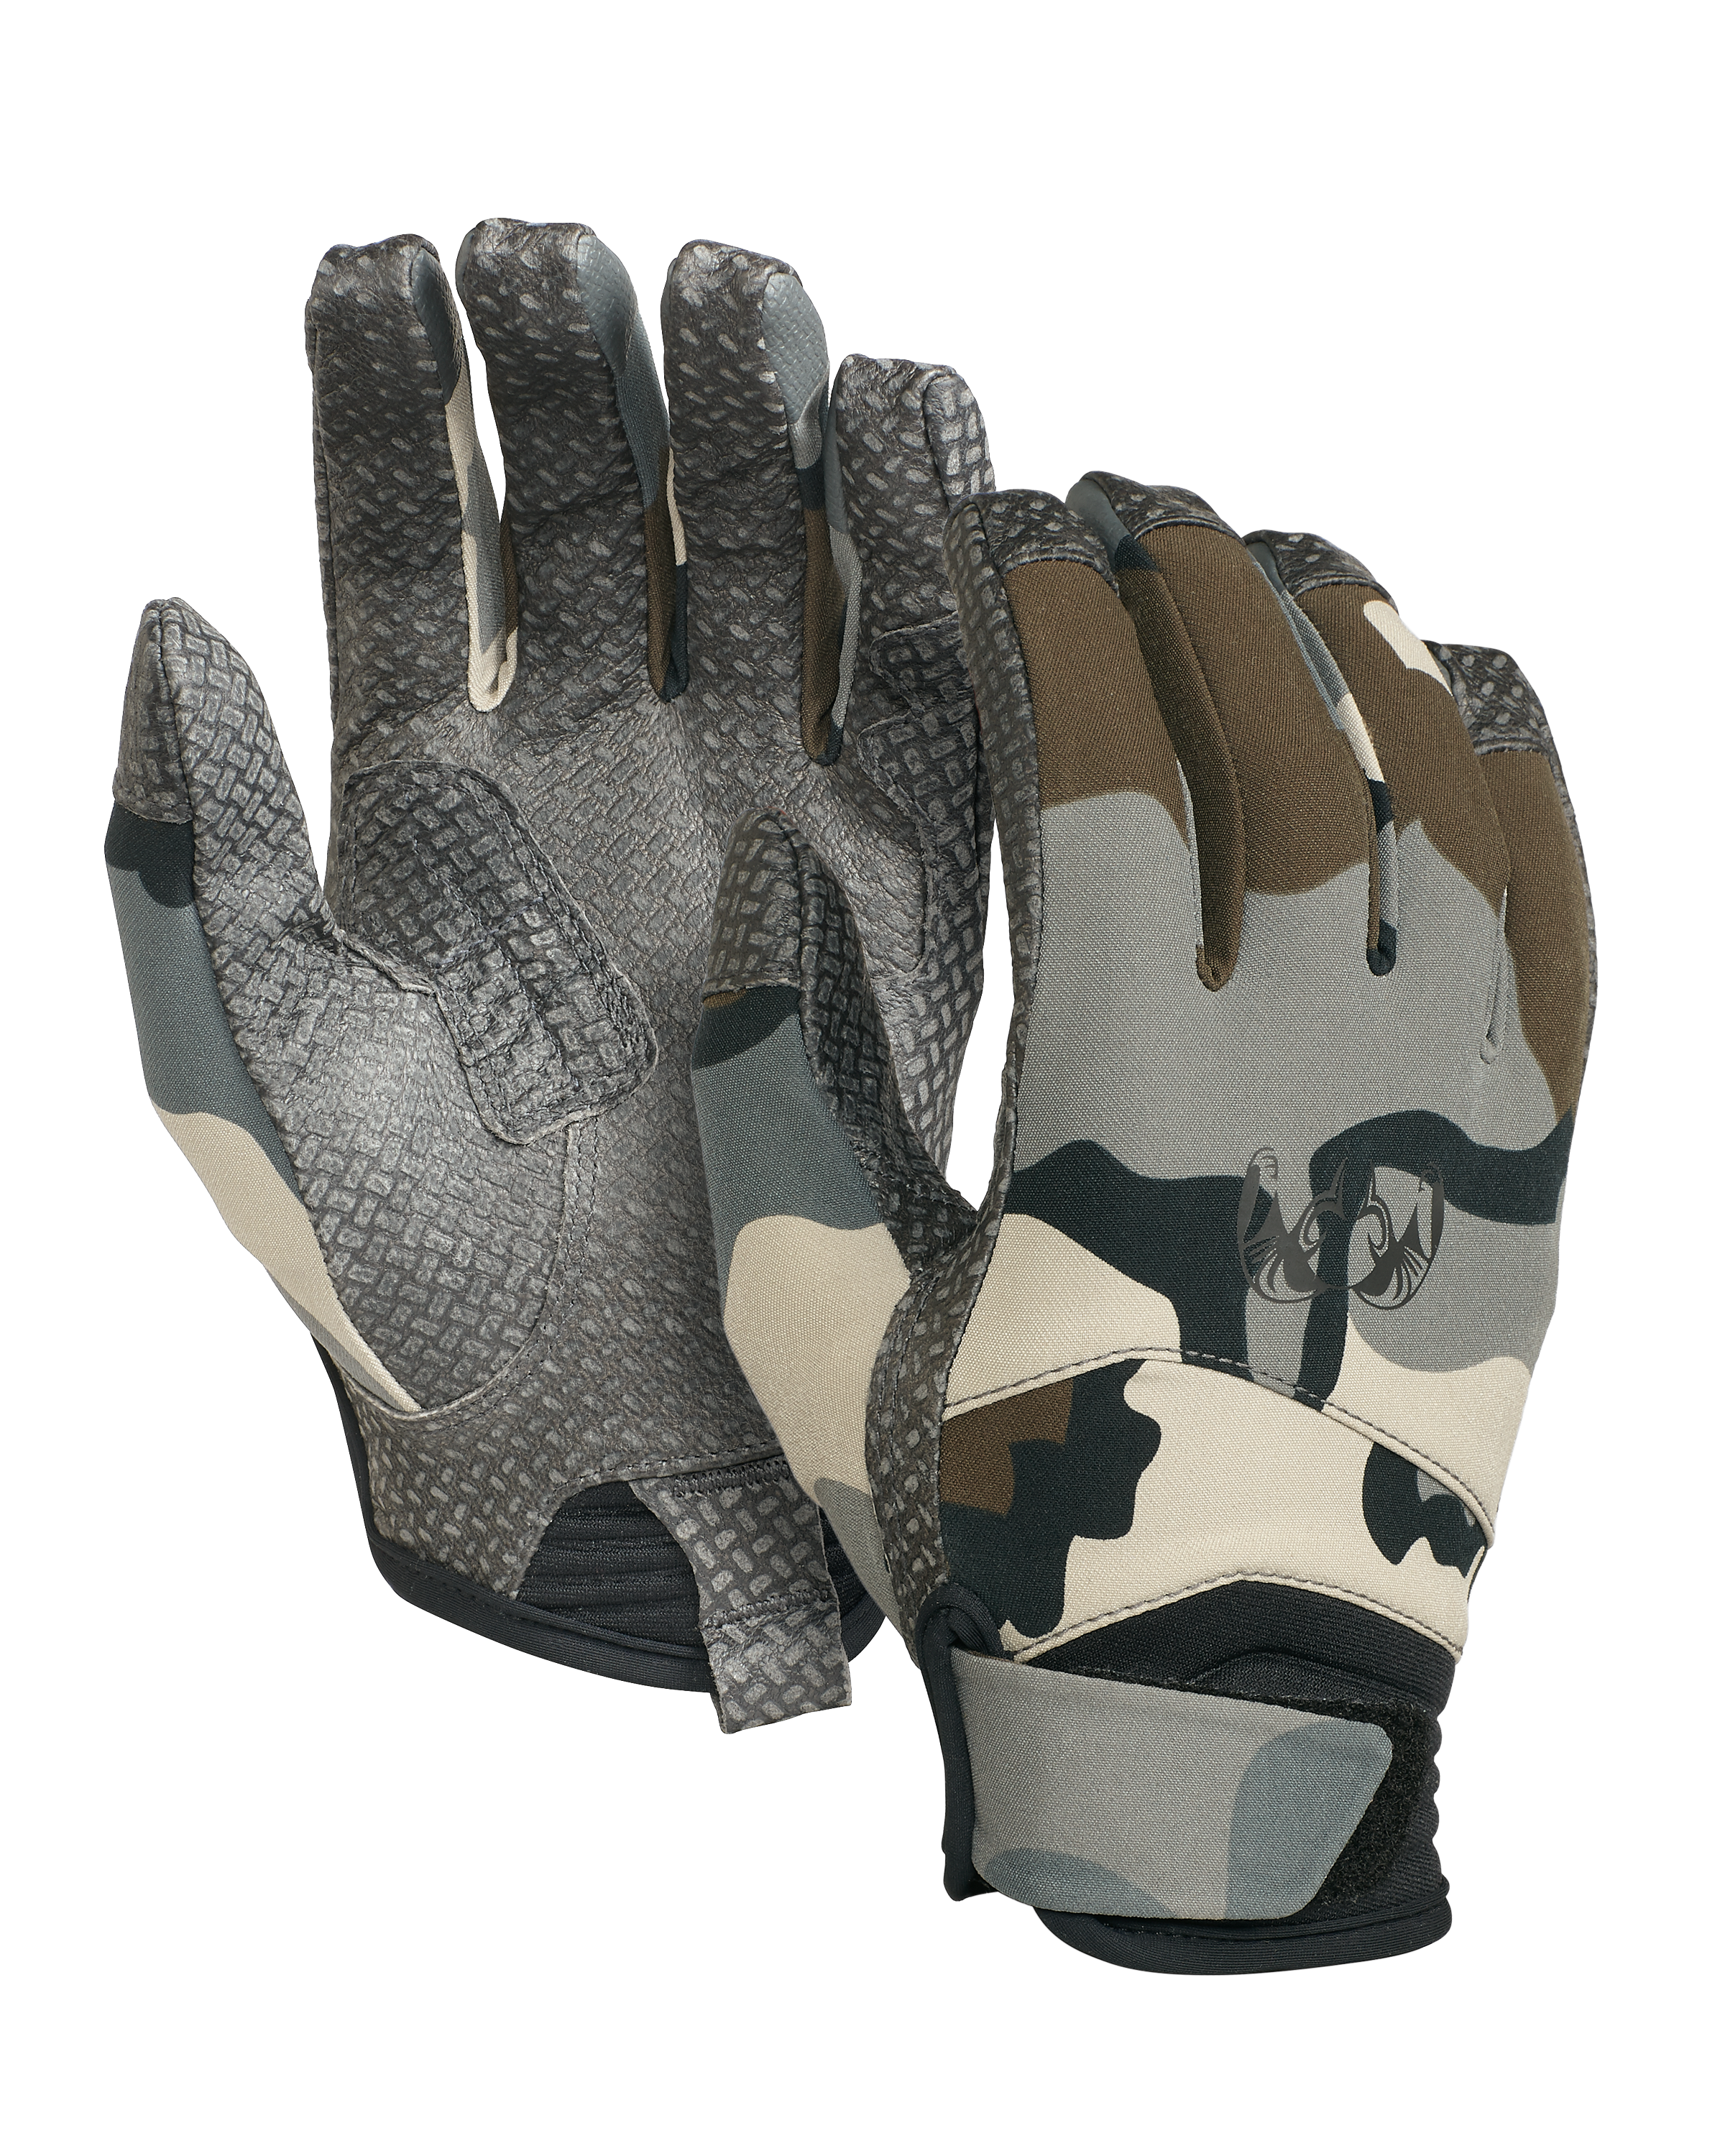 KUIU Attack Hunting Glove in Vias | Size XL